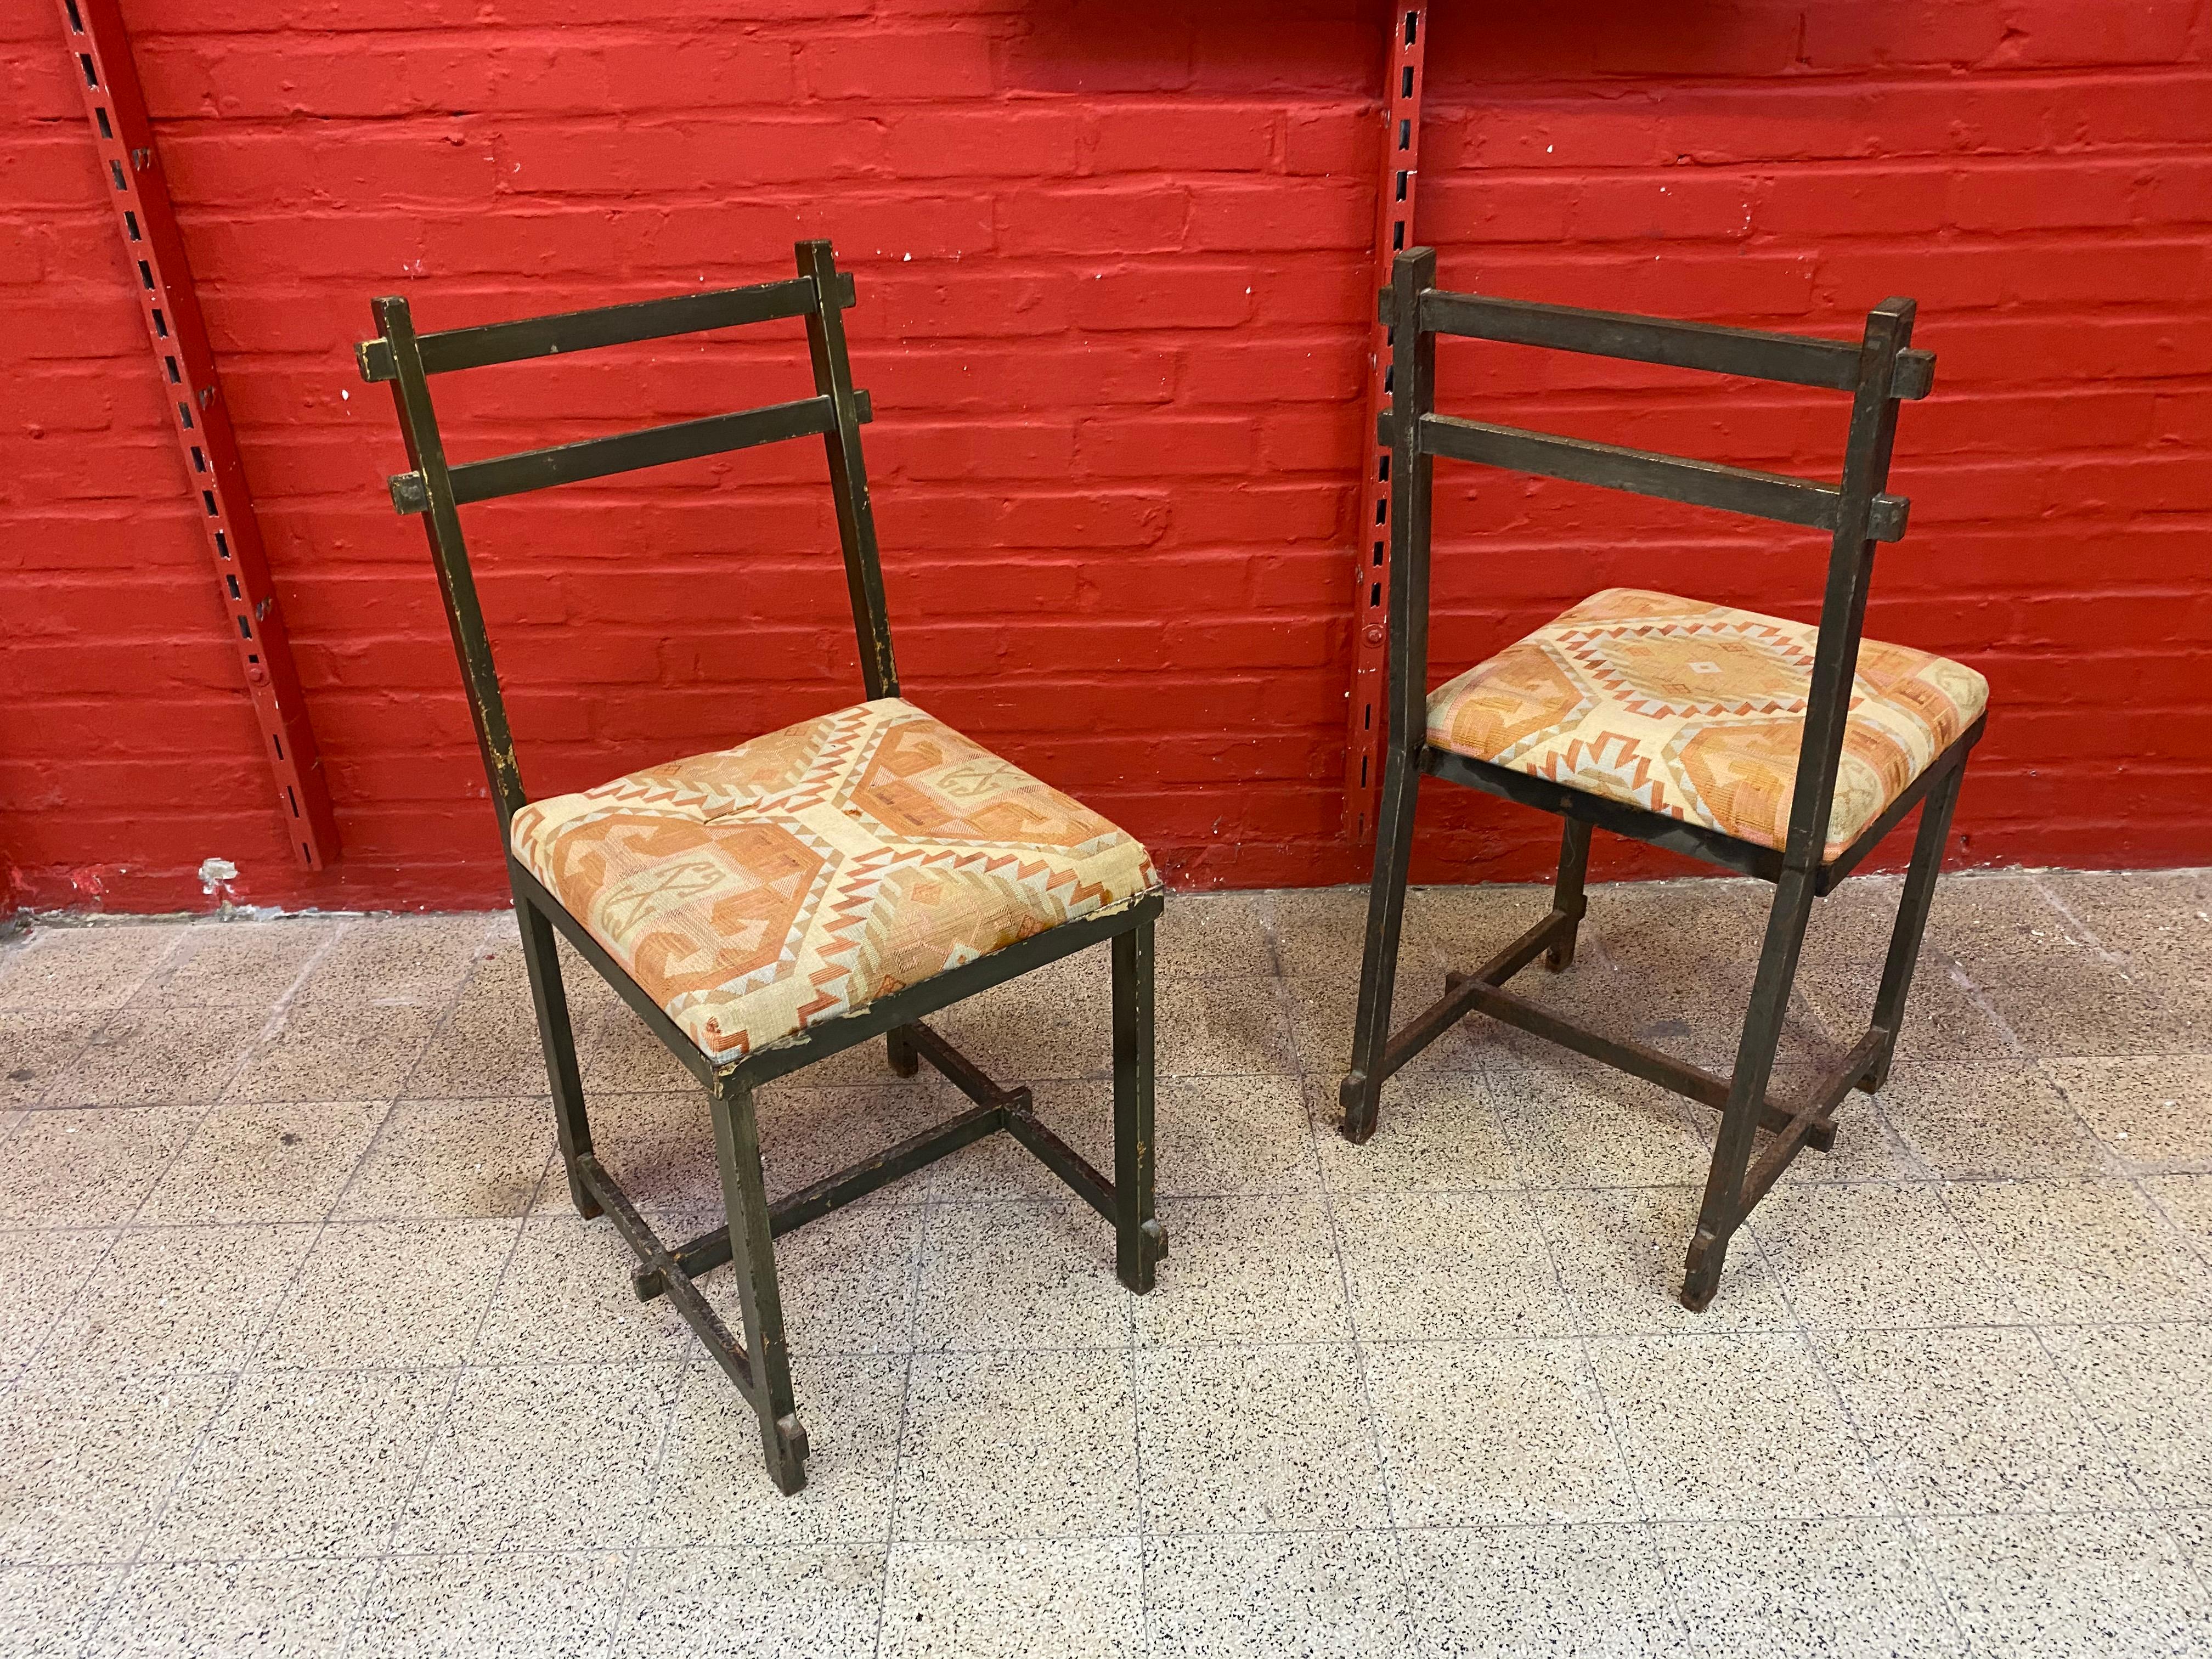 Original Chairs in Lacquered Metal, in the Style of Jacques Adnet circa 1940/195 For Sale 3